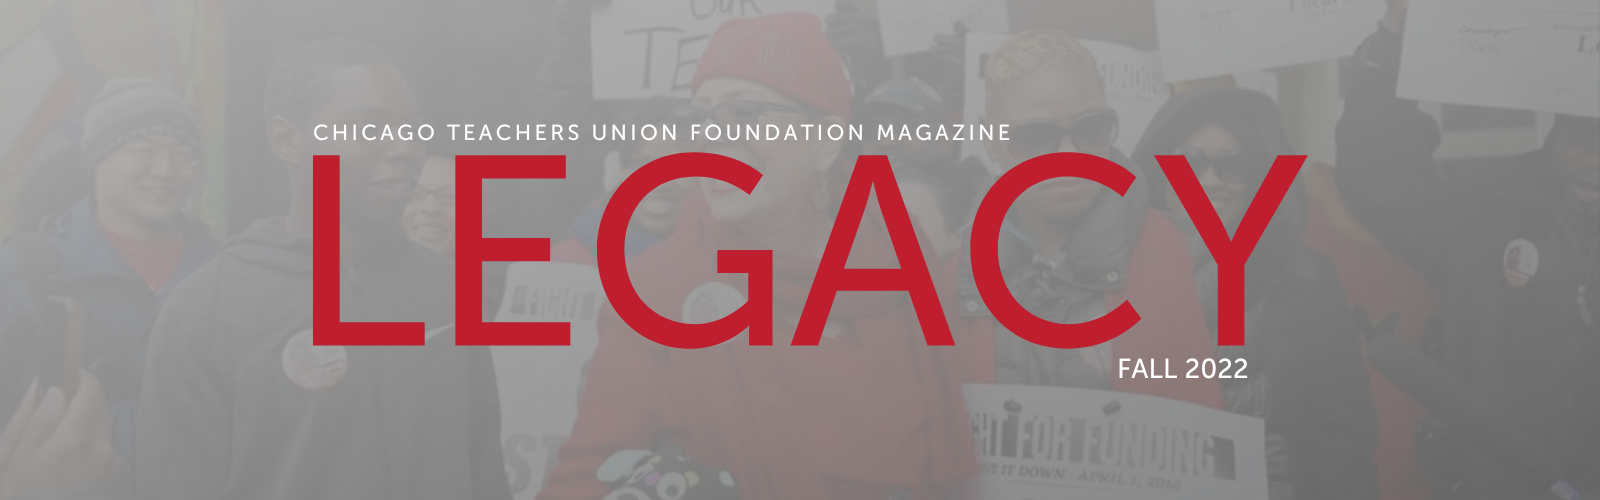 CTUF Legacy Newsletter (1600 × 500 px)